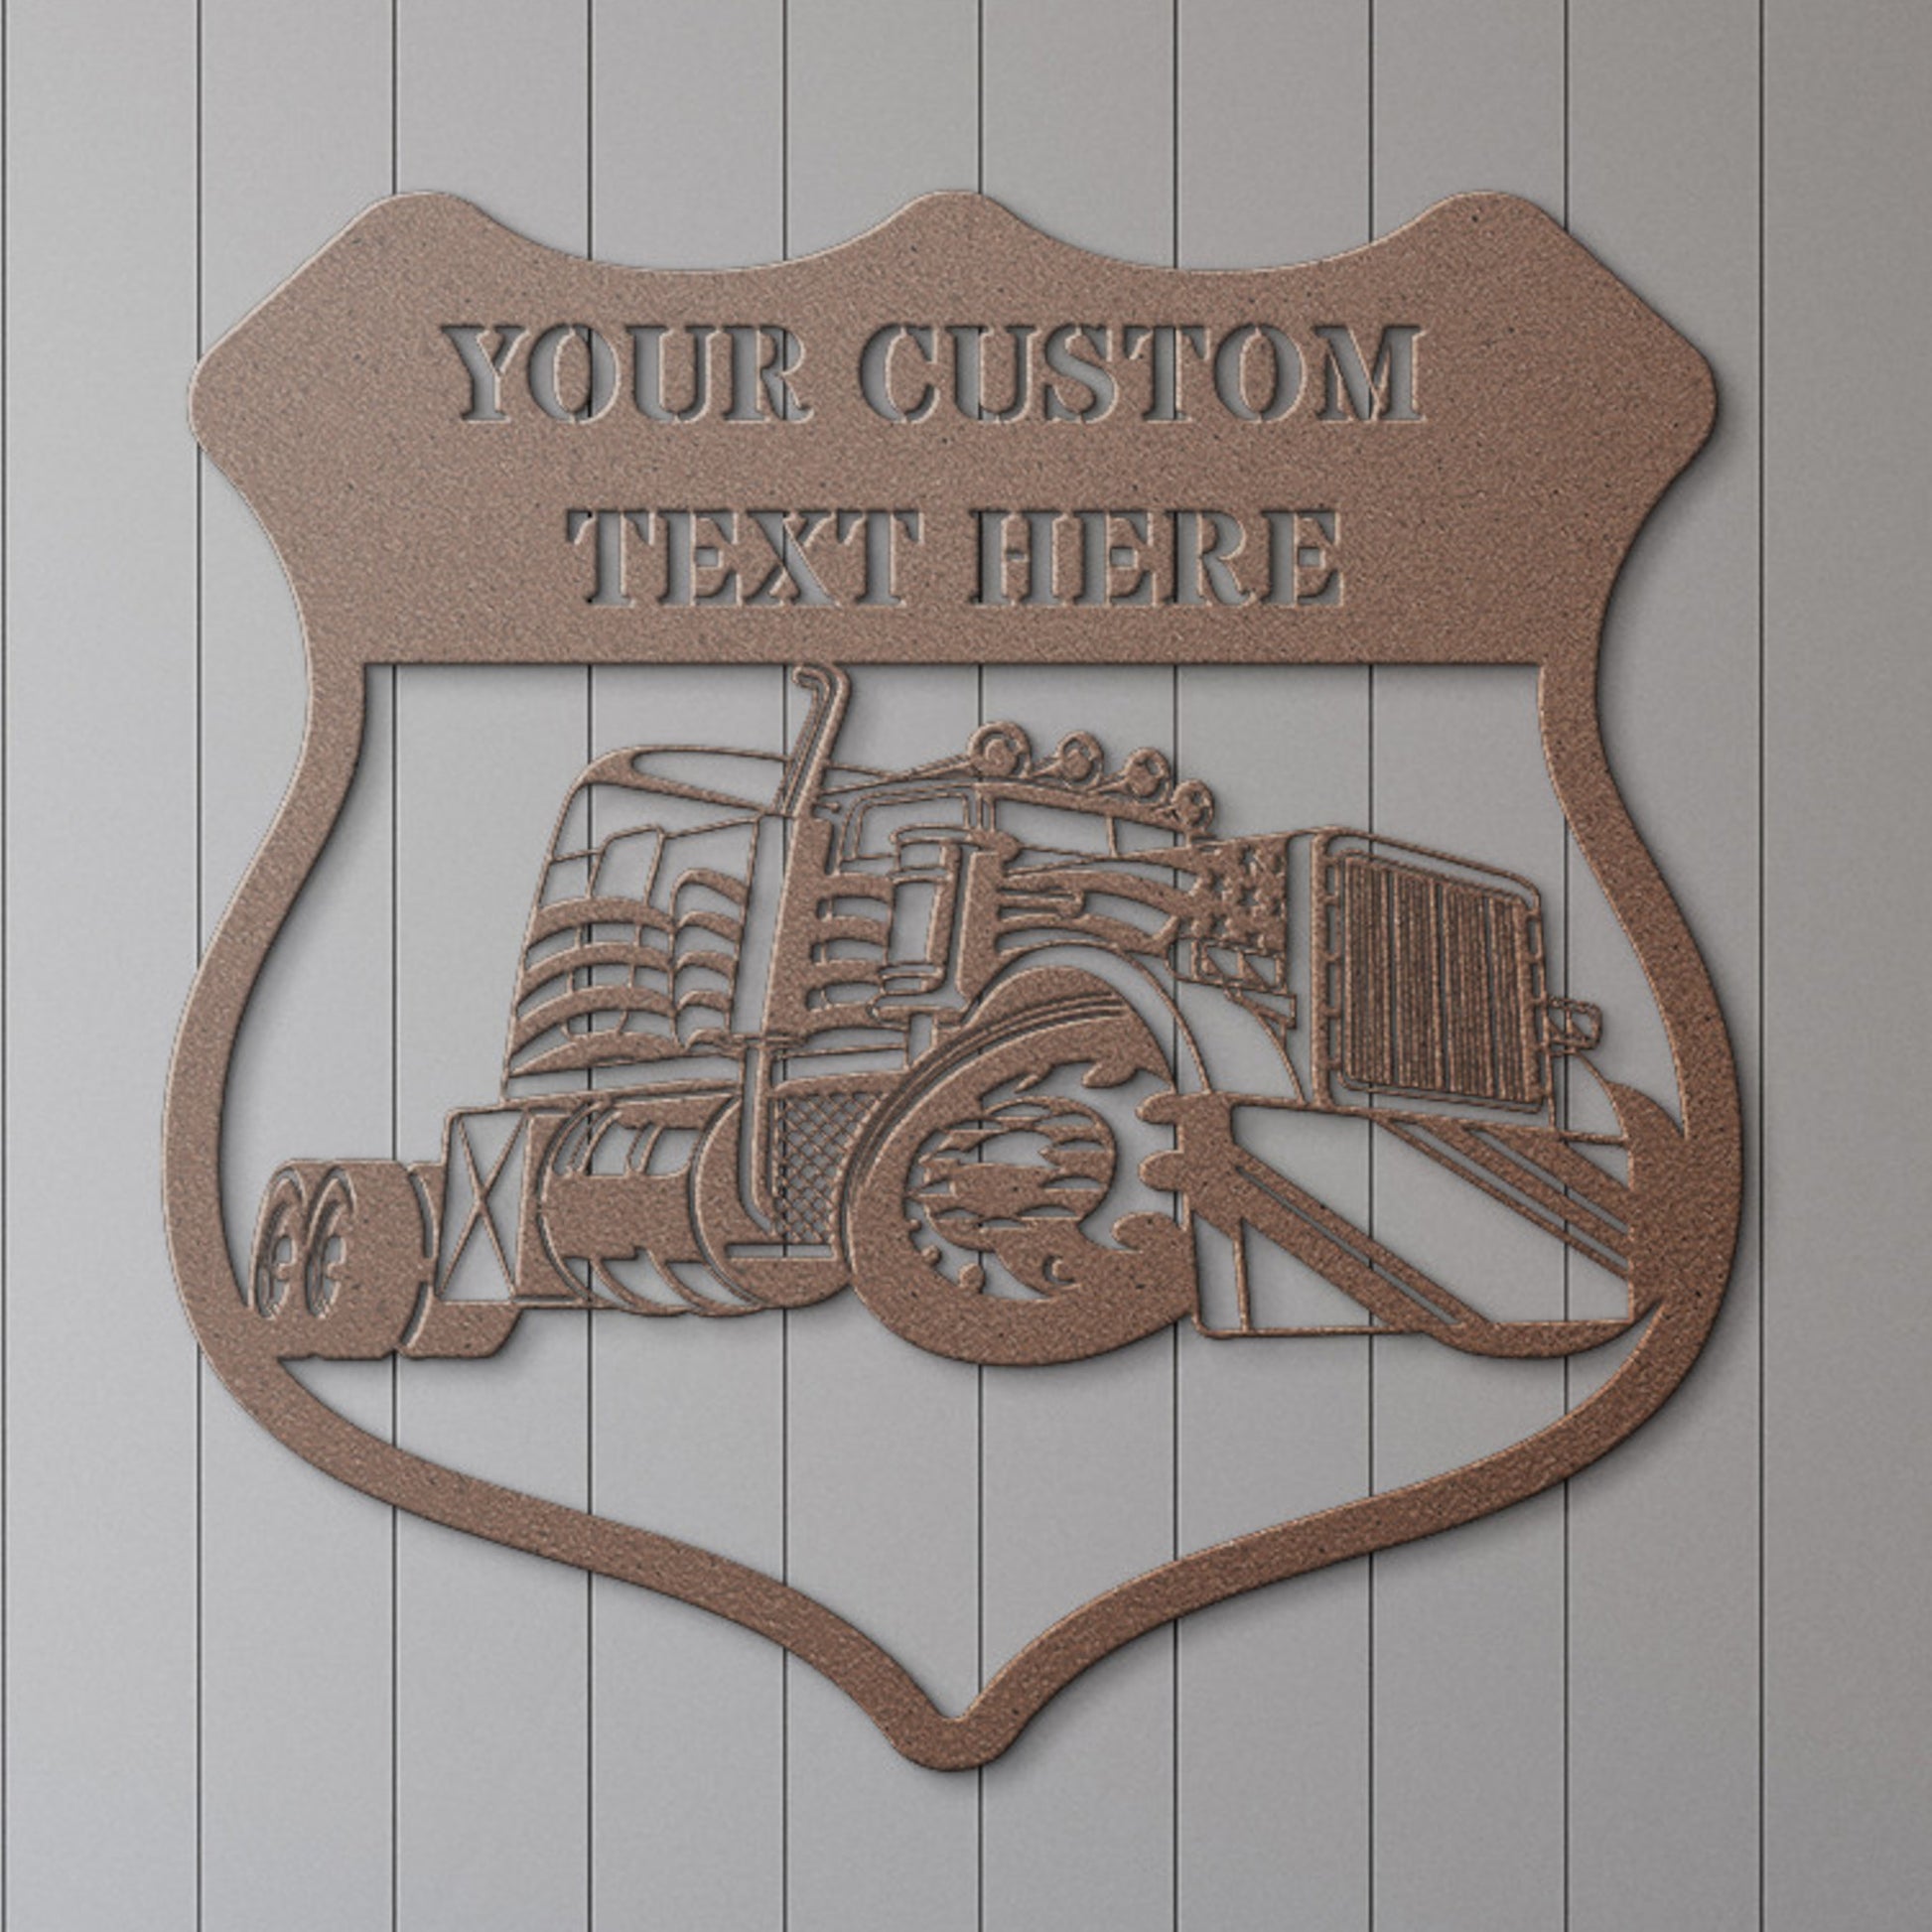 Personalized Route 66 US Trucker Name Metal Sign Monogram. Custom American Truck Driver Wall Decor. Big Rig 18-Wheeler. Route 66 Garage Sign